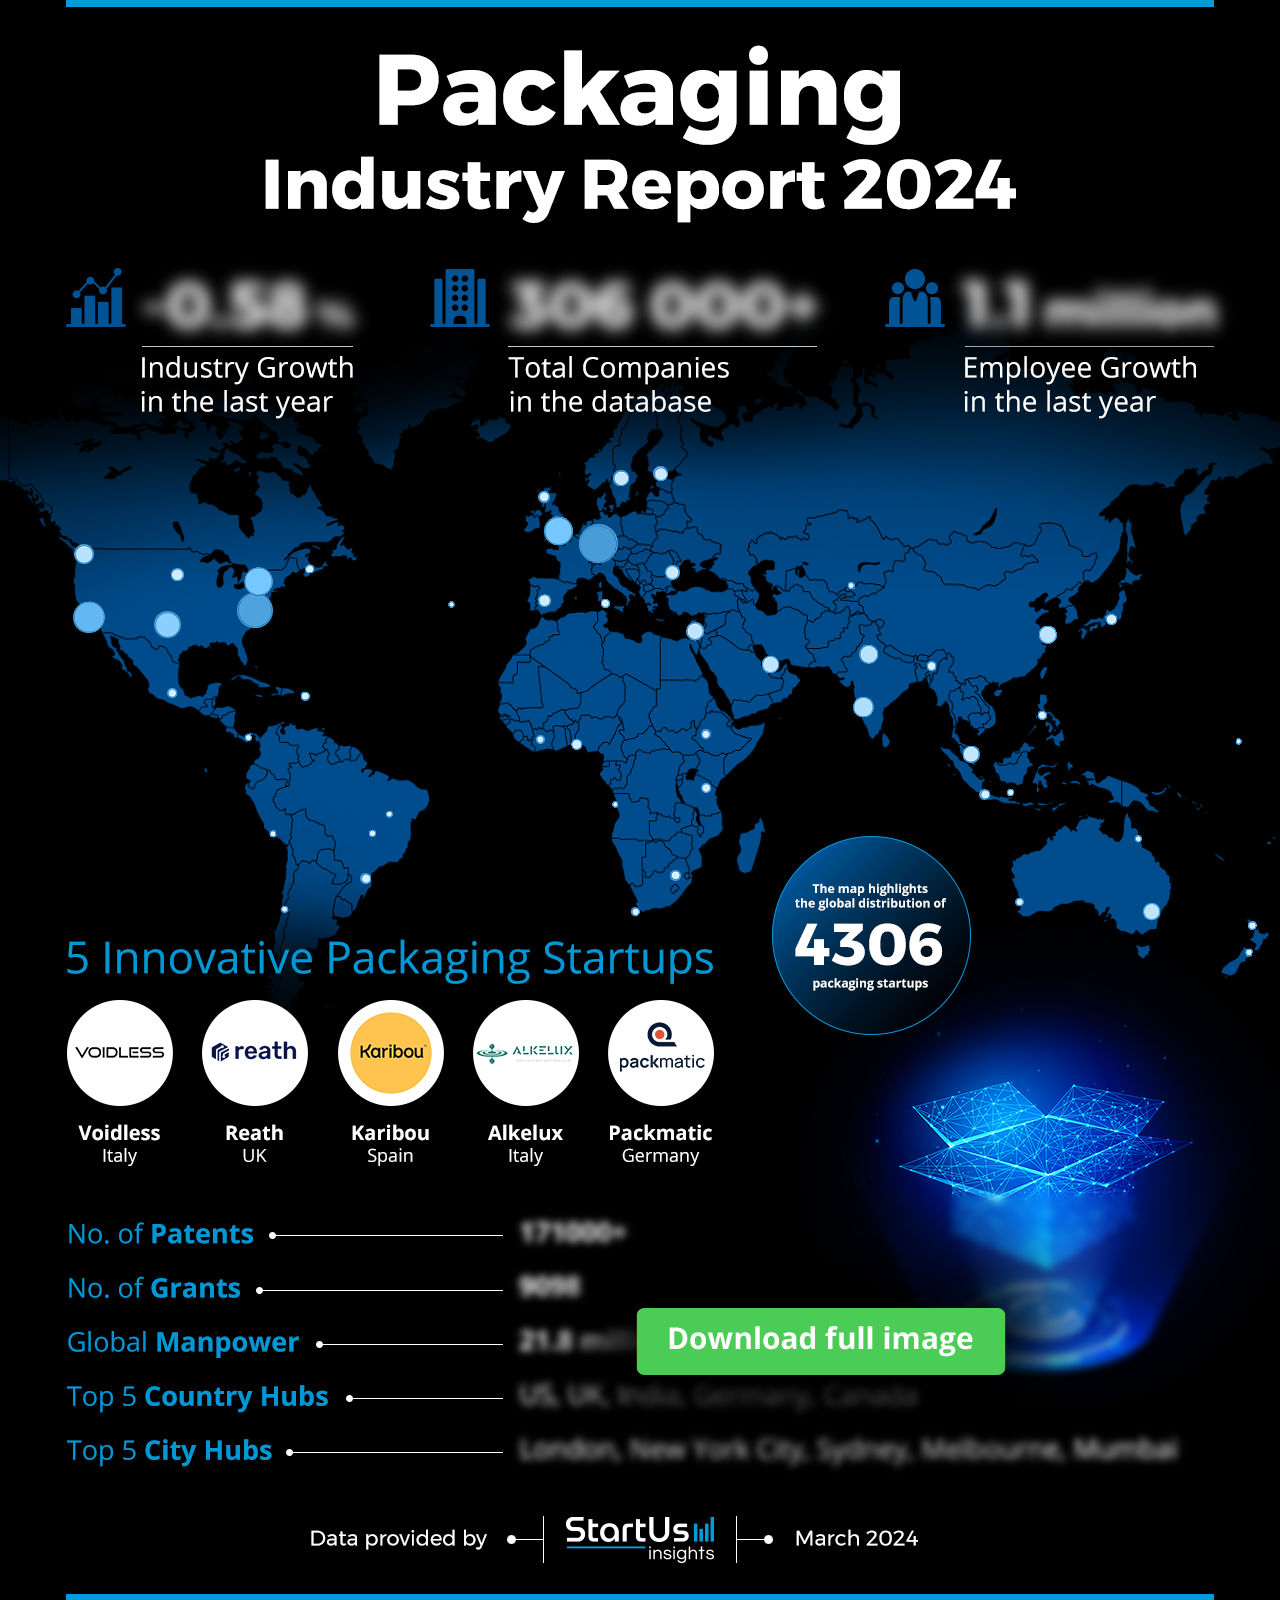 Packaging-Industry-Report-HeatMap-Blurred-StartUs-Insights-noresize